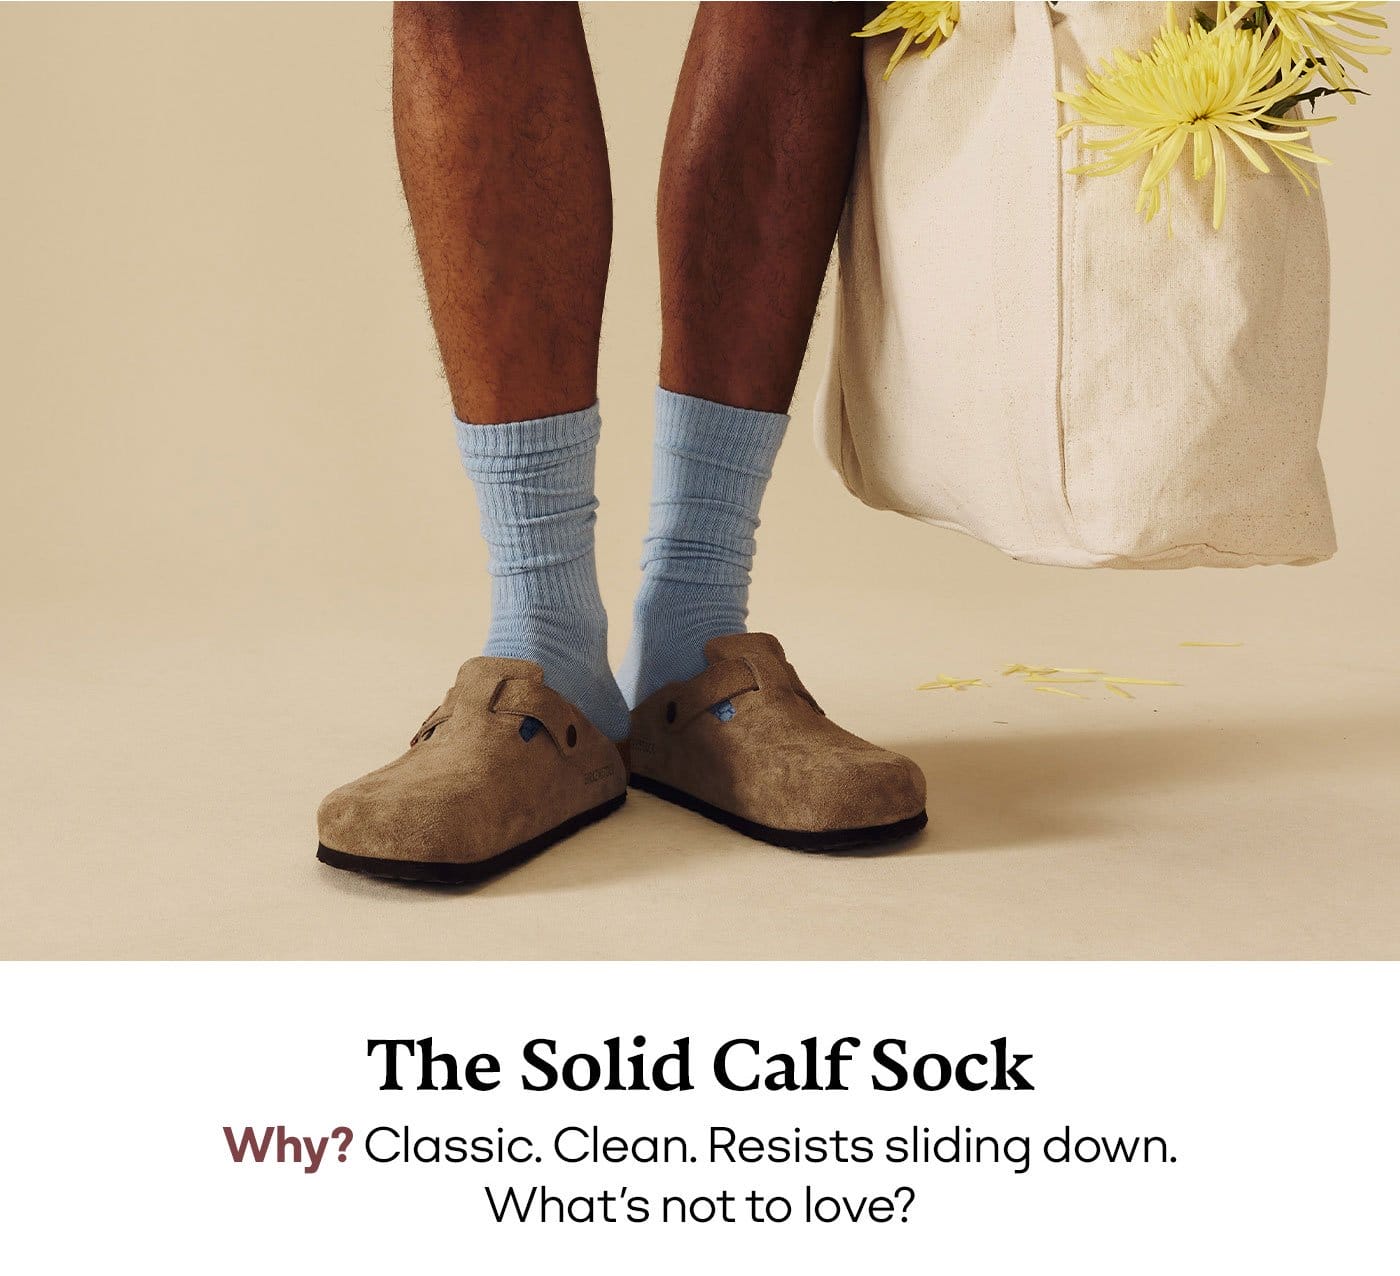 The Solid Calf Sock | Why? Classic. Clean. Resists sliding down. What's not to love?